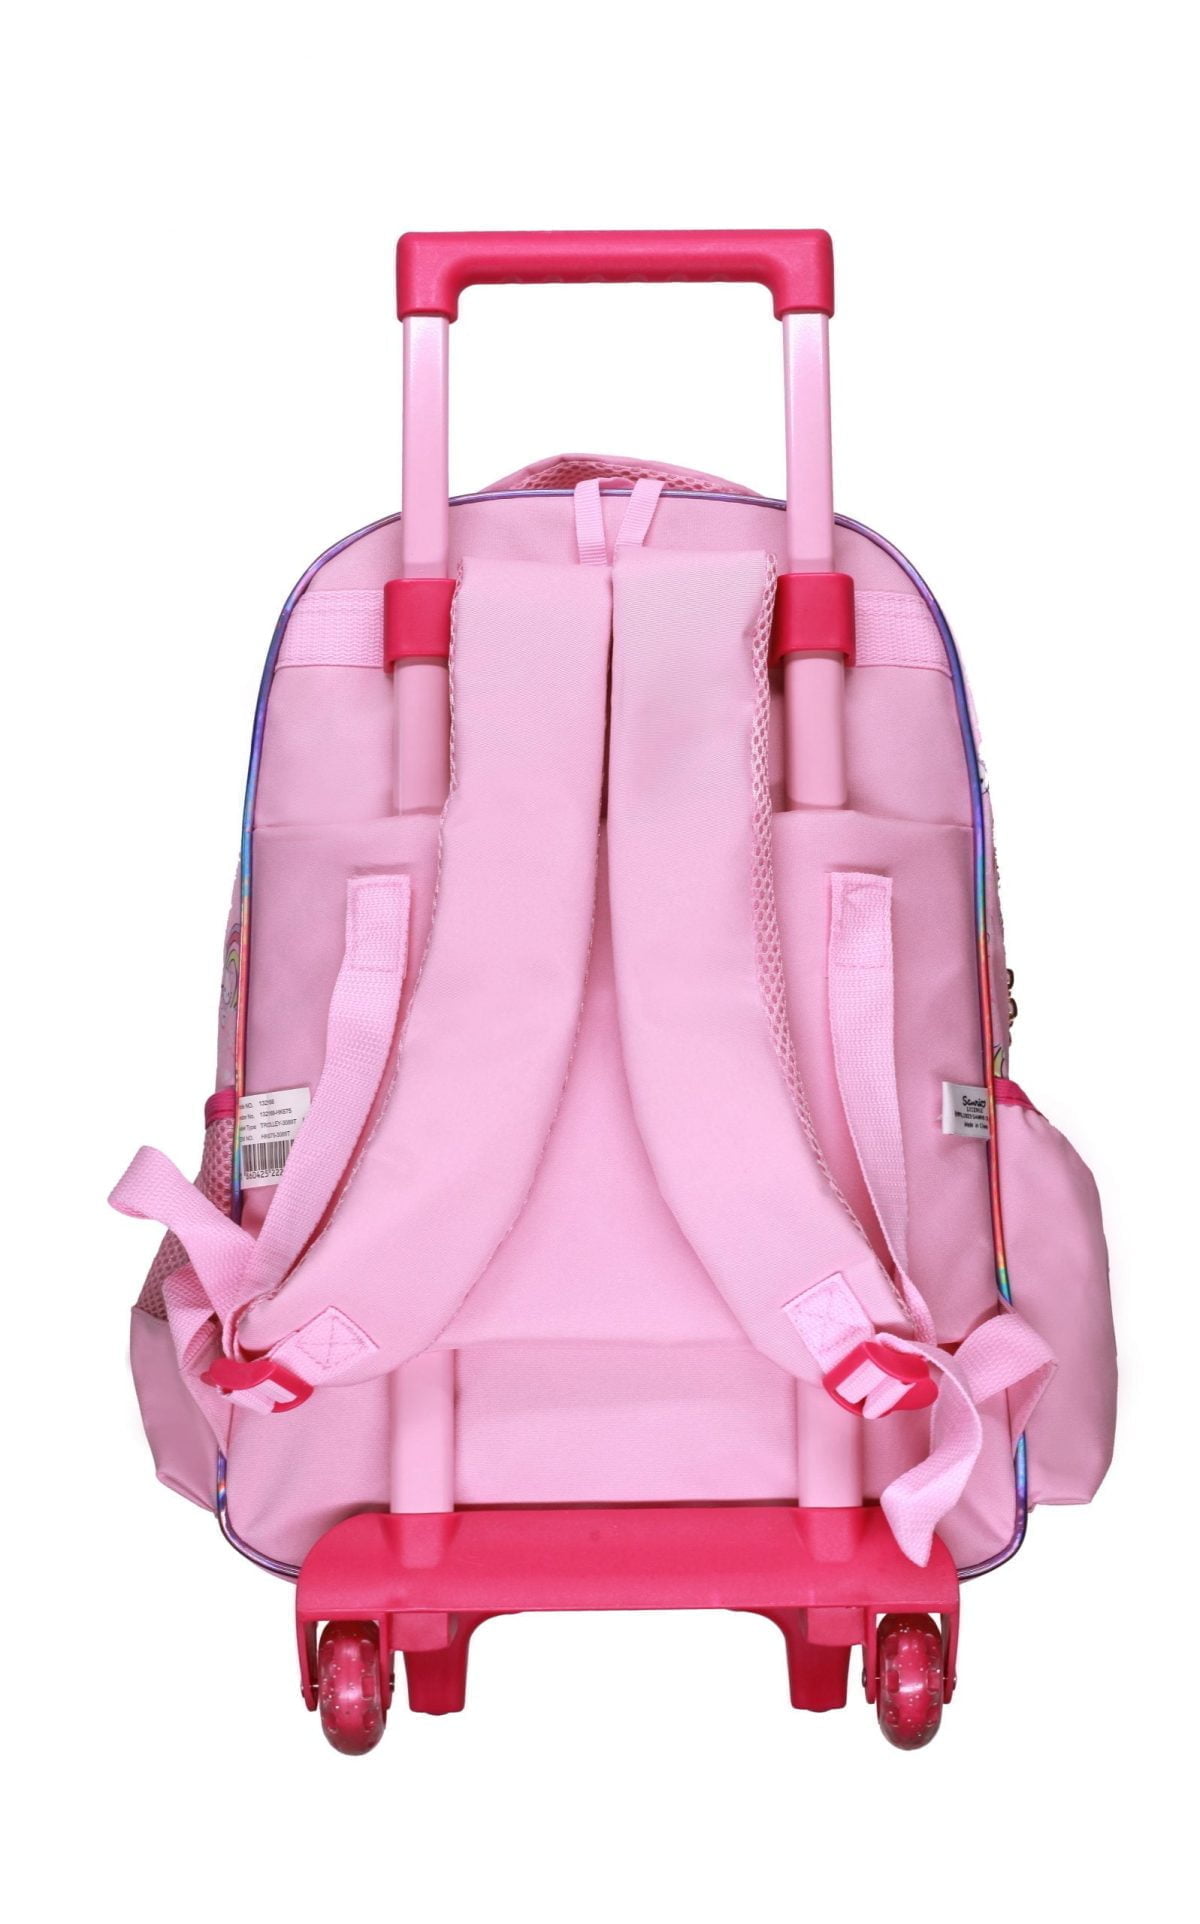 Hk675 3090T 3 Scaled The Trolley Bag Is A Reliable Companion For Your Journey. The Trolley Features Main Zip Compartment To Keep Your Child'S Belonging Or School Items. The Trolley Has Comfortable Handle On The Top. The Fine Quality Material And Printing Makes It Durable And Stylish Option. It Is Easy To Zip And Unzip With Smooth Zippers And Pullers. The Wheels On The Bottom Make It Easy To Drag. Wipe With A Clean And Dry Cloth. Hello Kitty Trolley Bag 15&Quot; - 2 Main Compartments And 2 Side Pockets (Hk675)